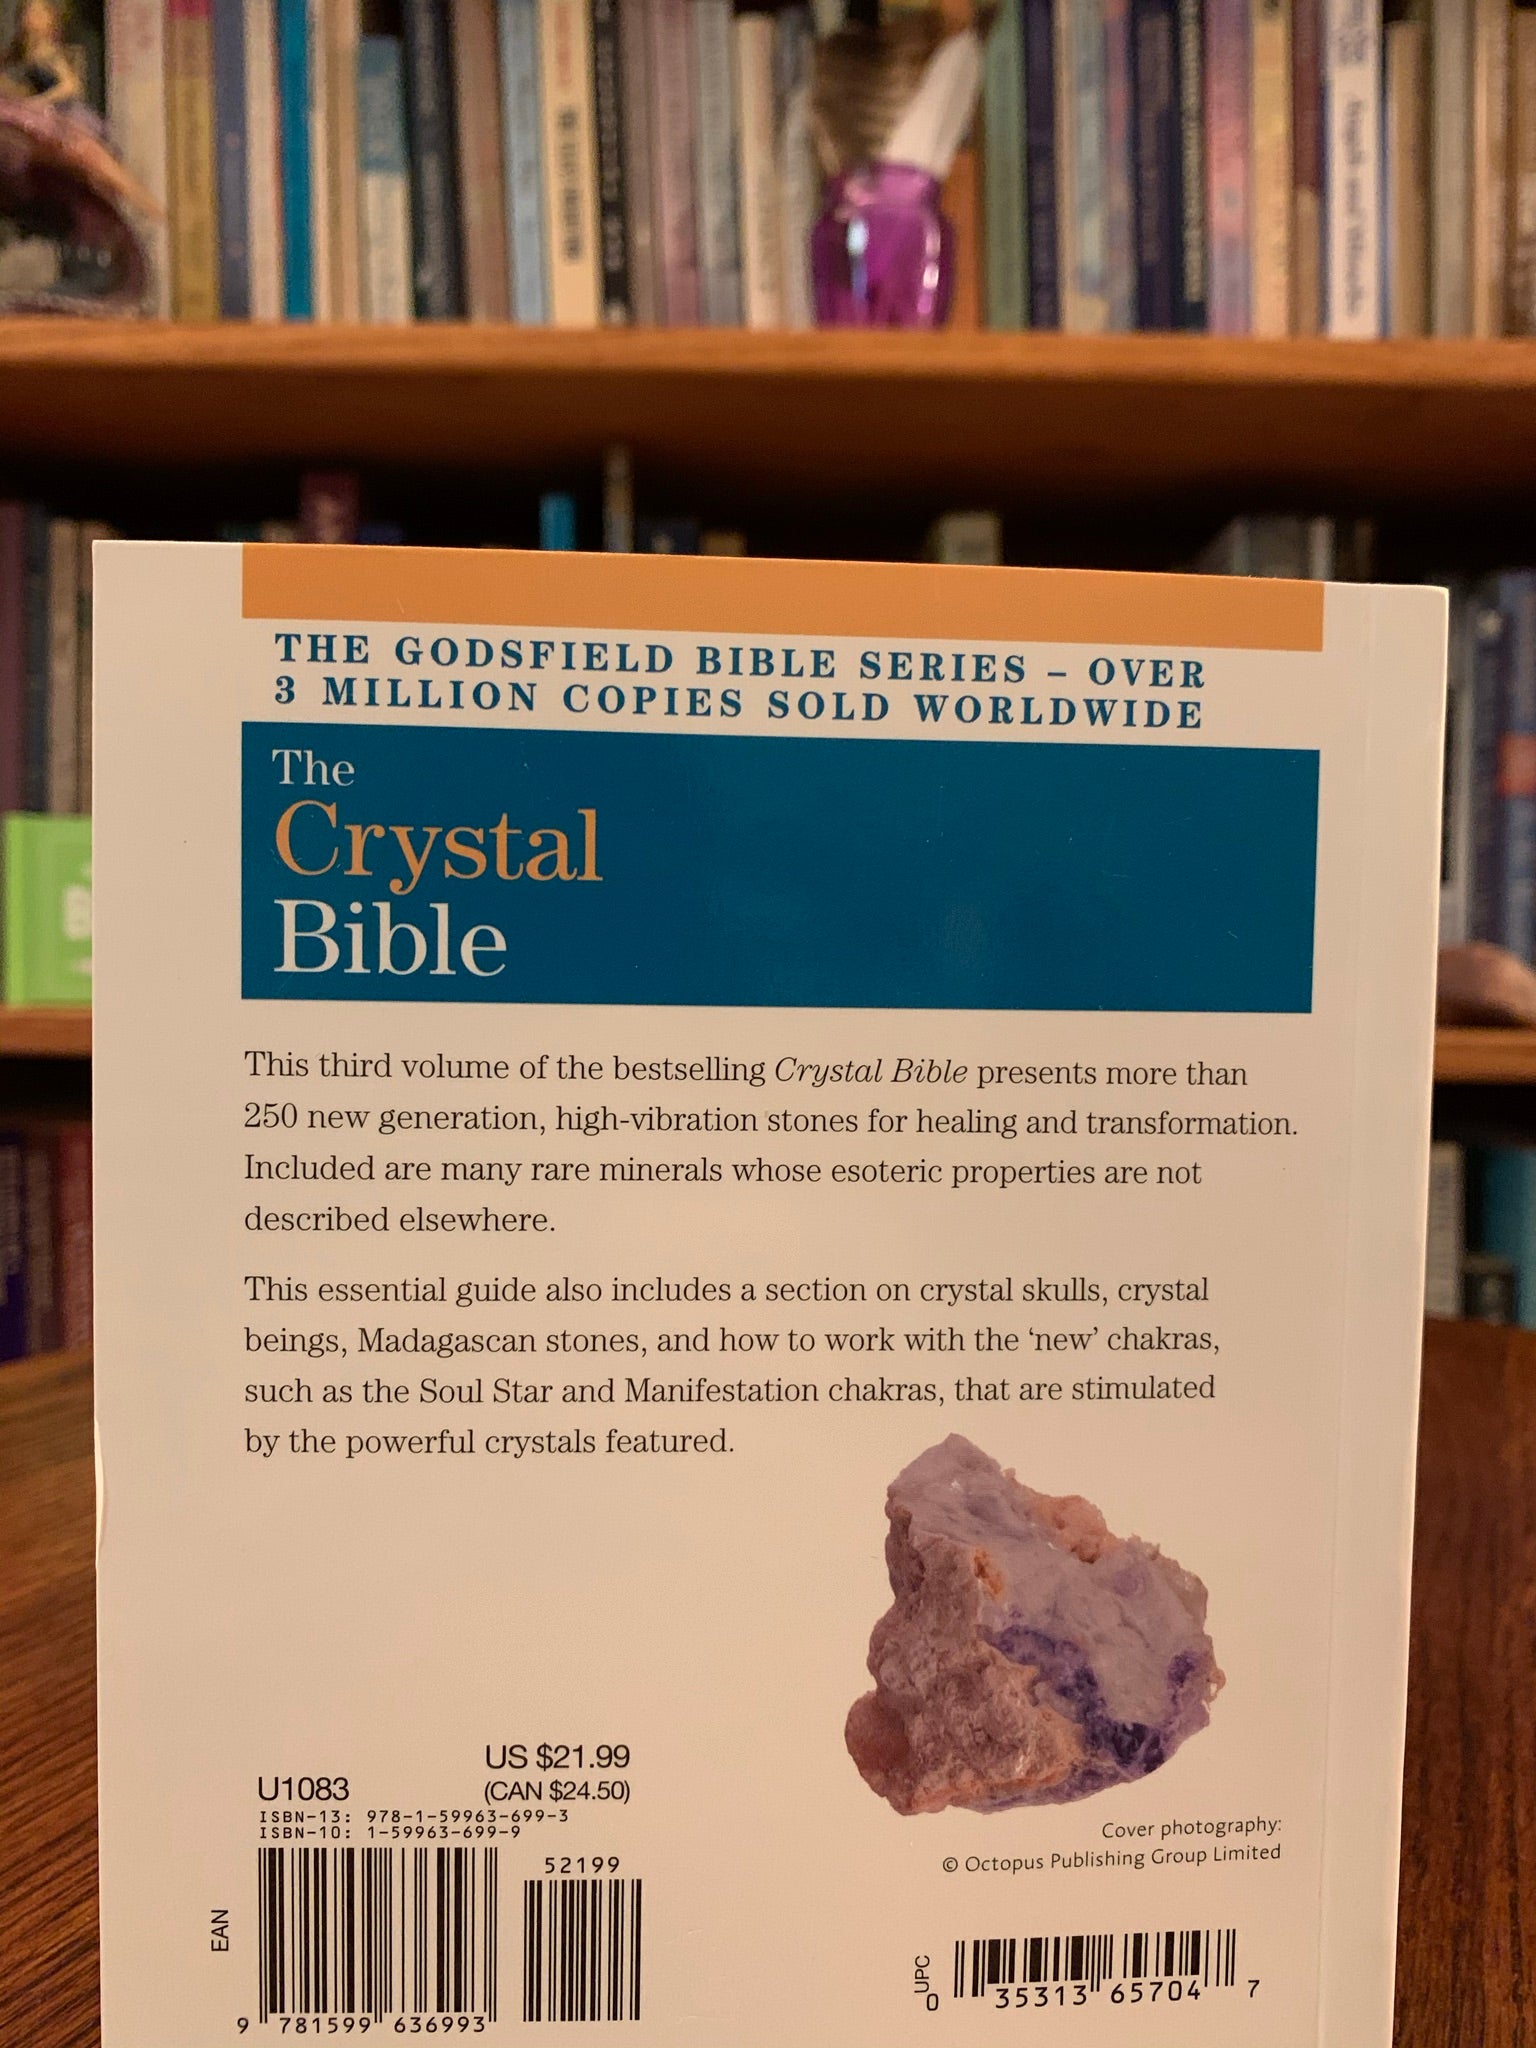 Close-up view back cover. The Crystal Bible 3 is the third comprehensive book about crystals and gemstones by Judy Hall, including 250 additional crystals. It is 400 pages long and made with high quality paper. Most of the book is devoted to in depth descriptions of the esoteric and practical properties of stones and crystals, but she also includes sections on crystal vibrations, crystal skulls and more. She has written three separate volumes of her crystal Bible books and also a book on crystal healing.